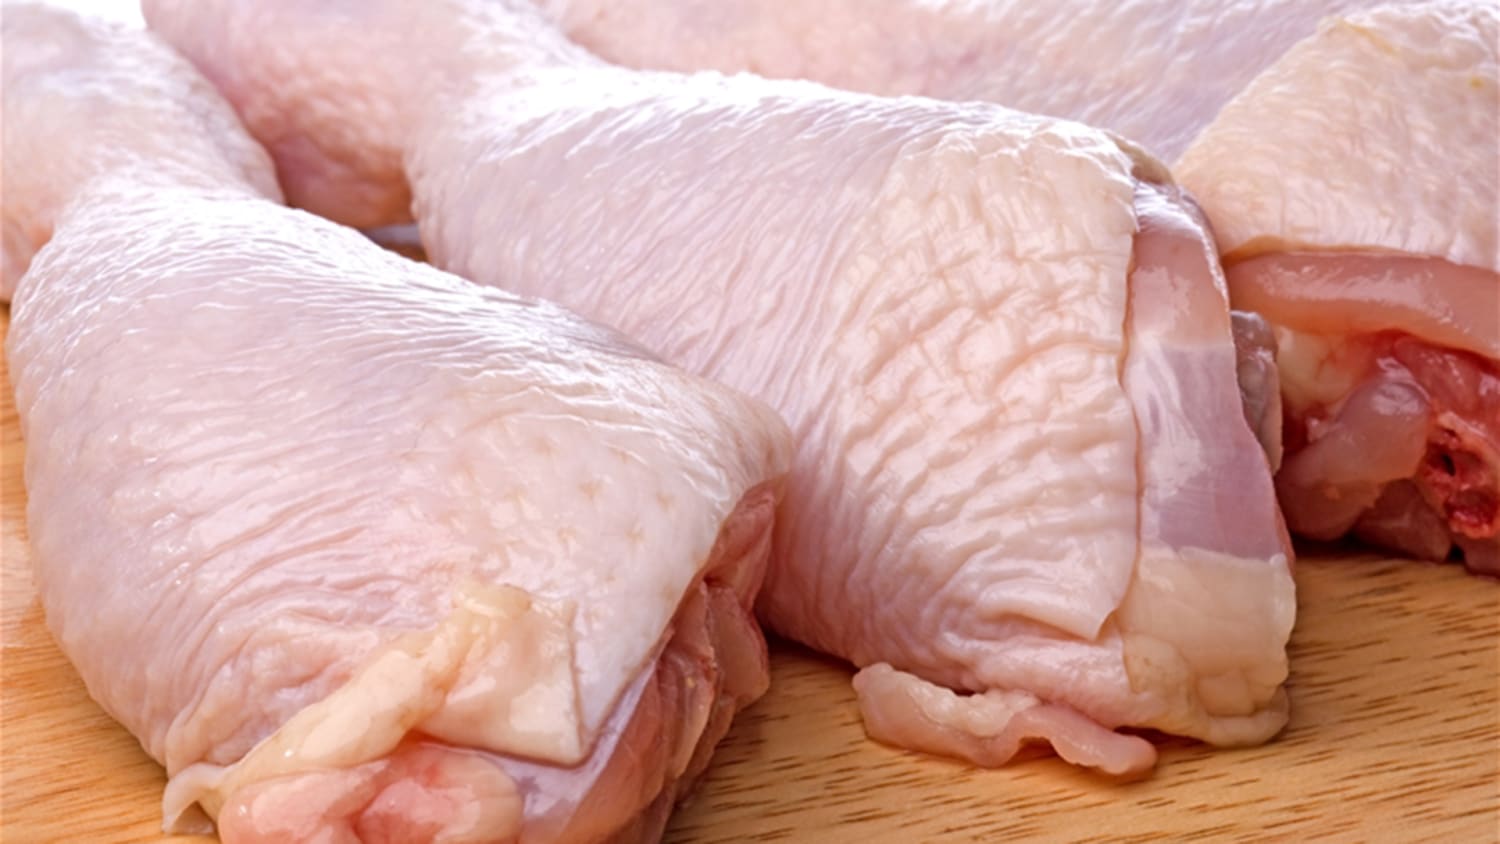 Should You Wash Raw Chicken? Here's What the CDC Says